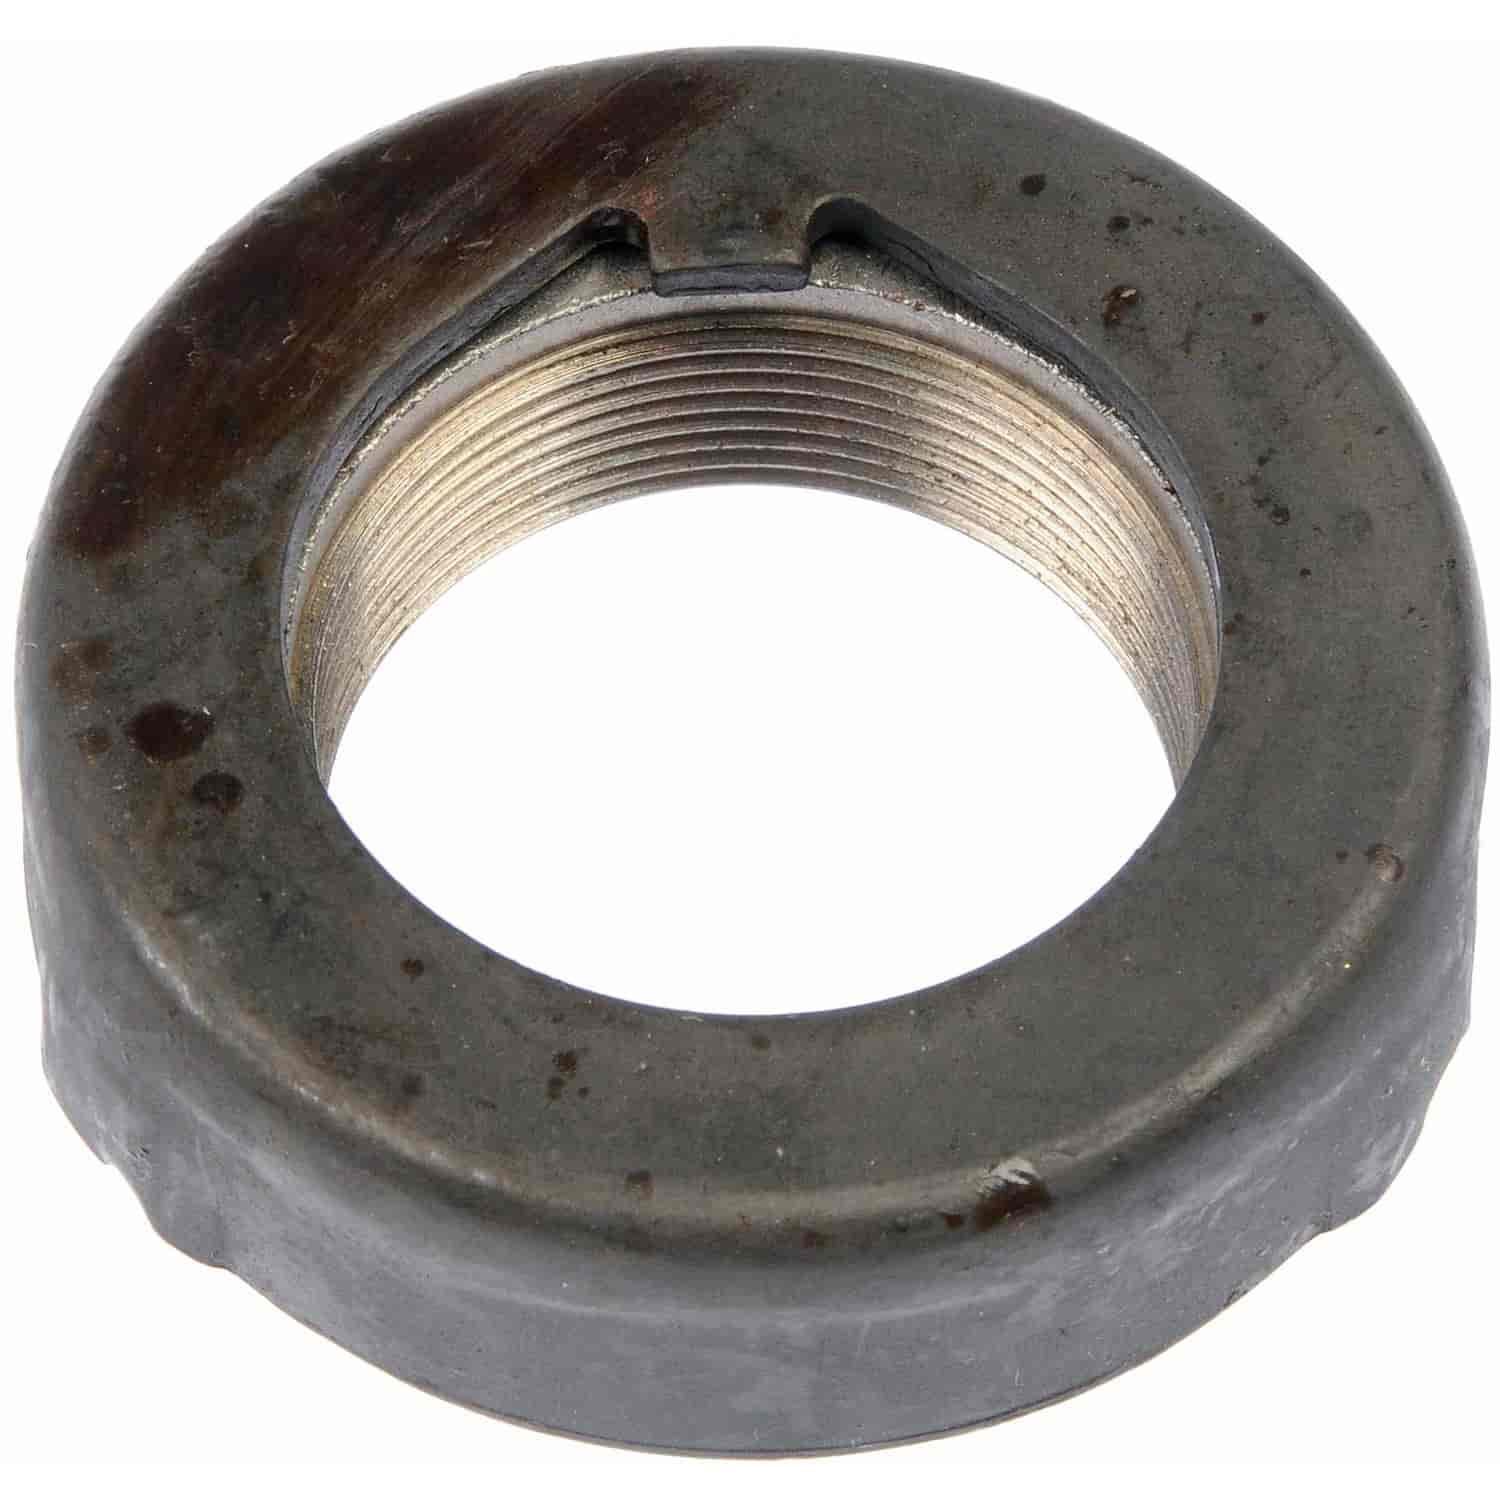 Spindle Nut 1 In.-5/8 In.-16 Hex Size 2-9/16 In.